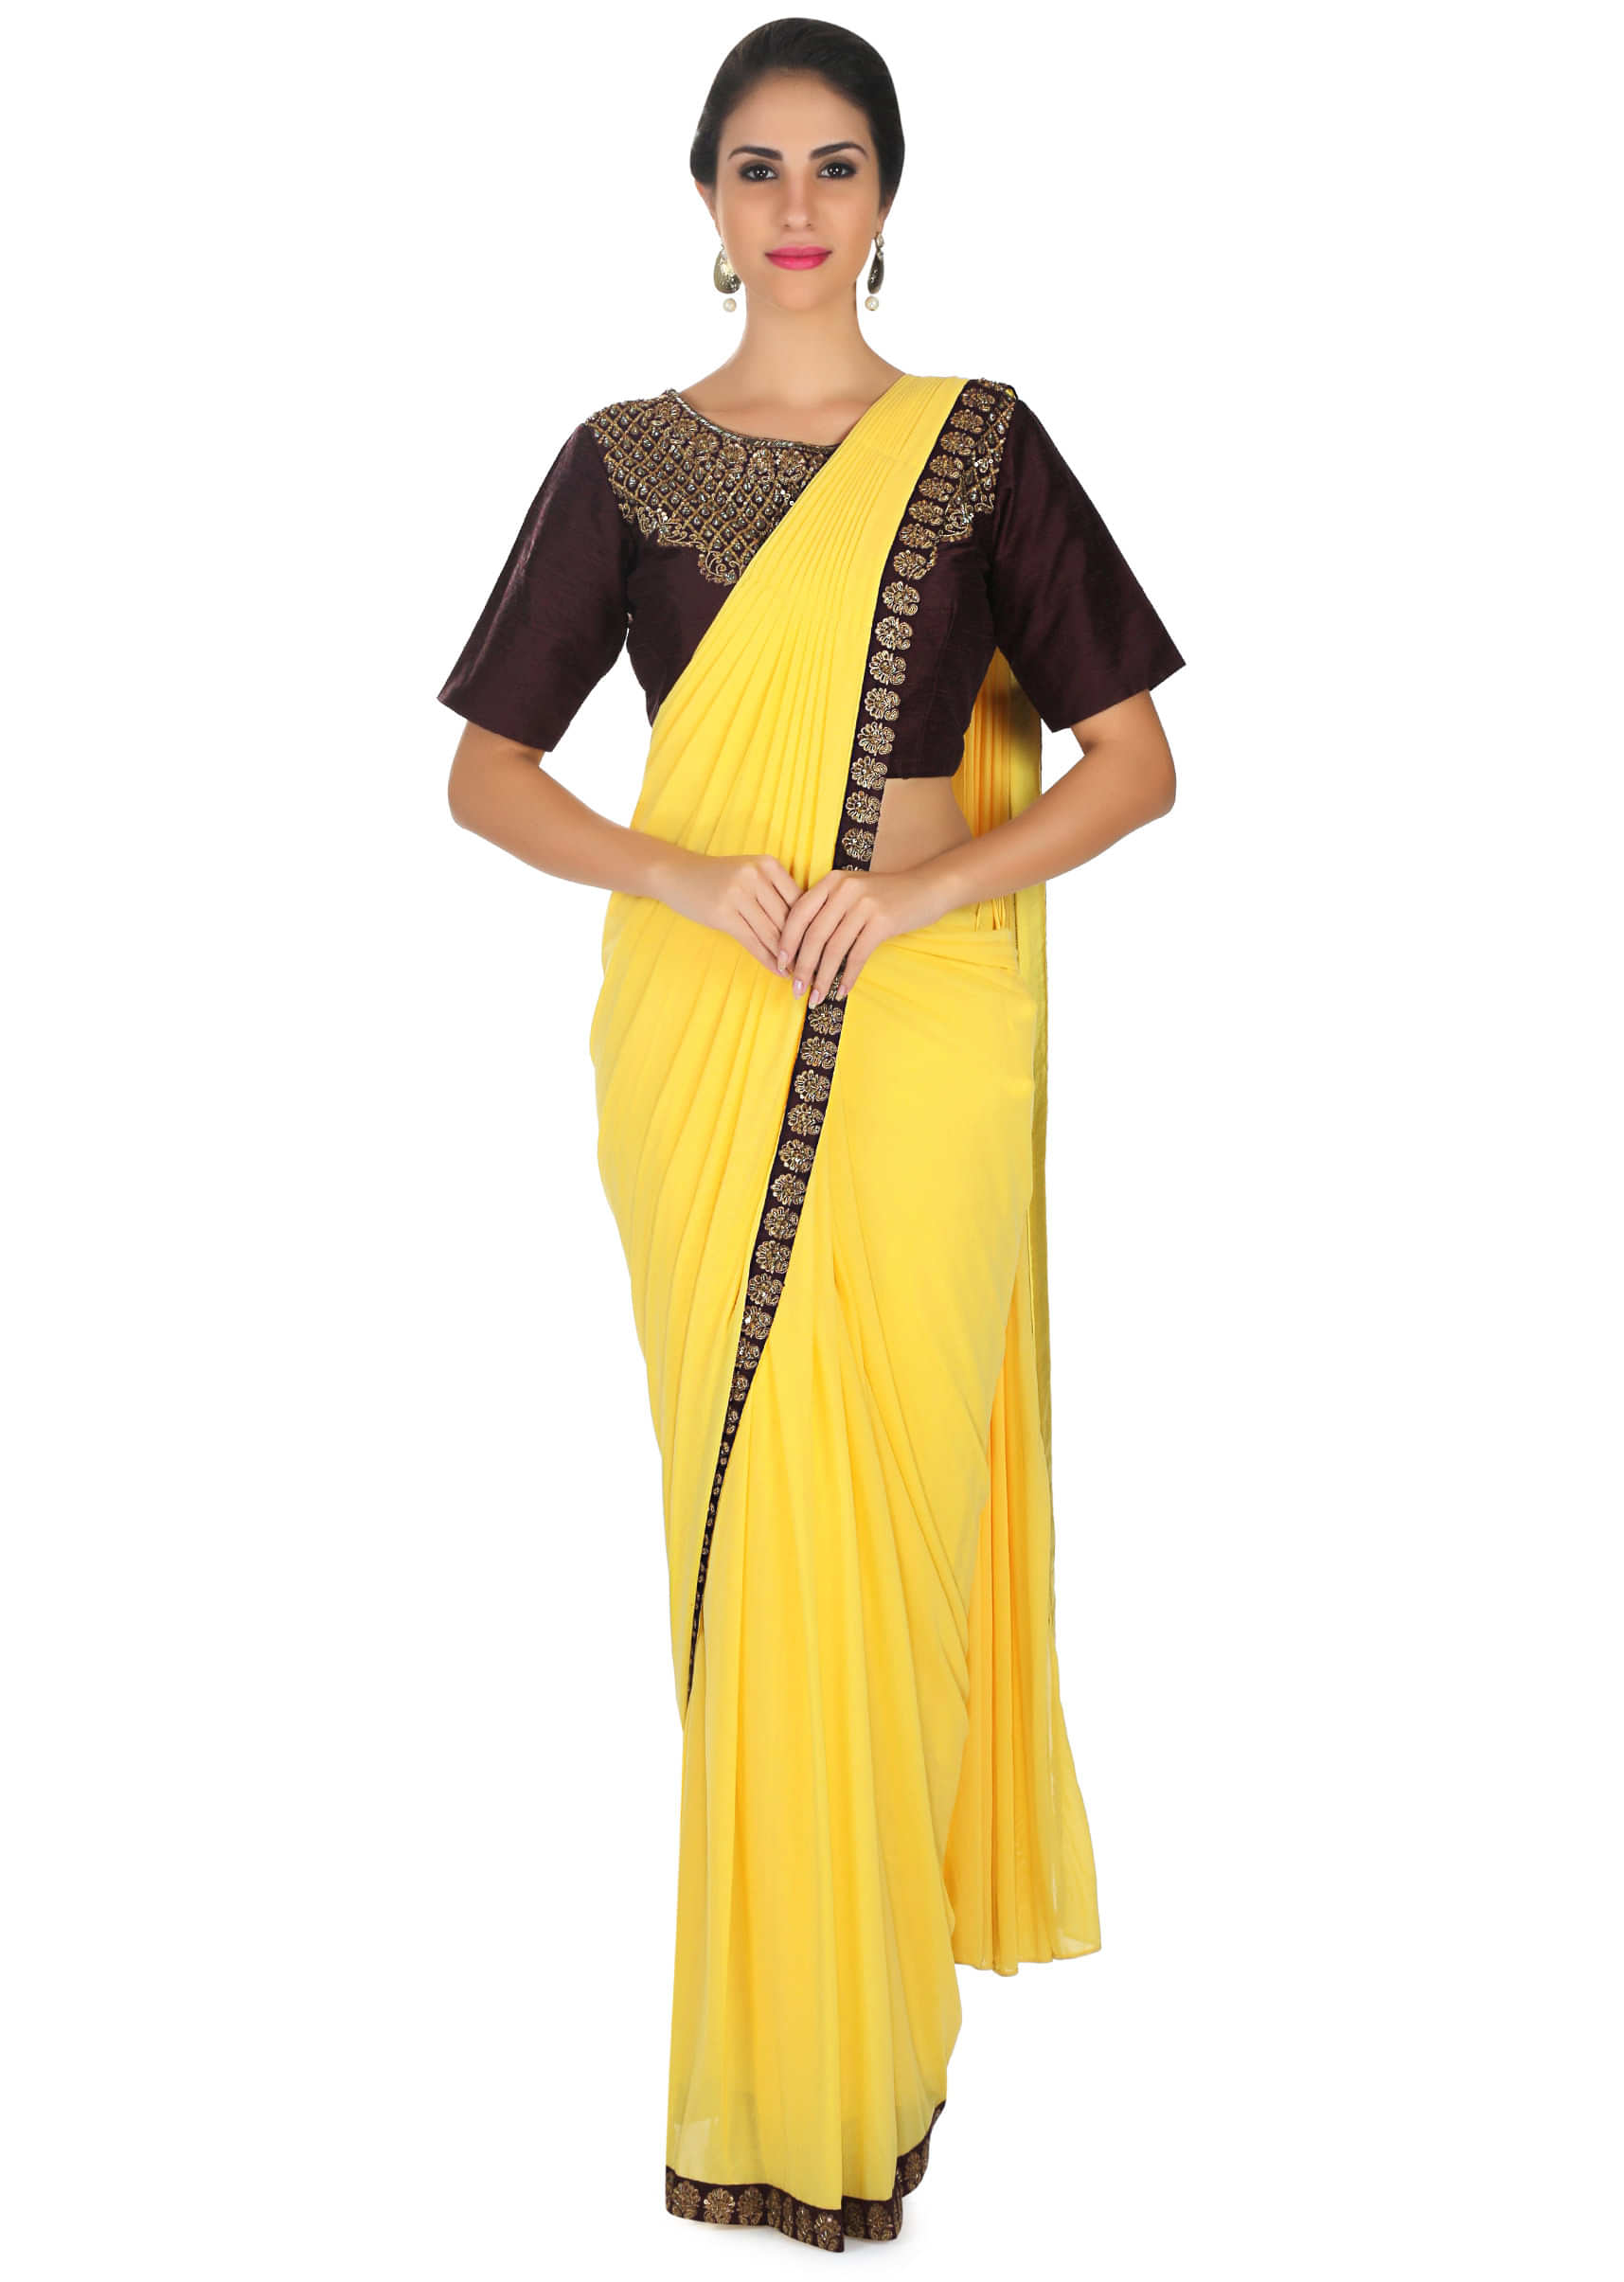 Bright Yellow Saree With Prestitched Pallu And Brown Embroidered Blouse Online - Kalki Fashion